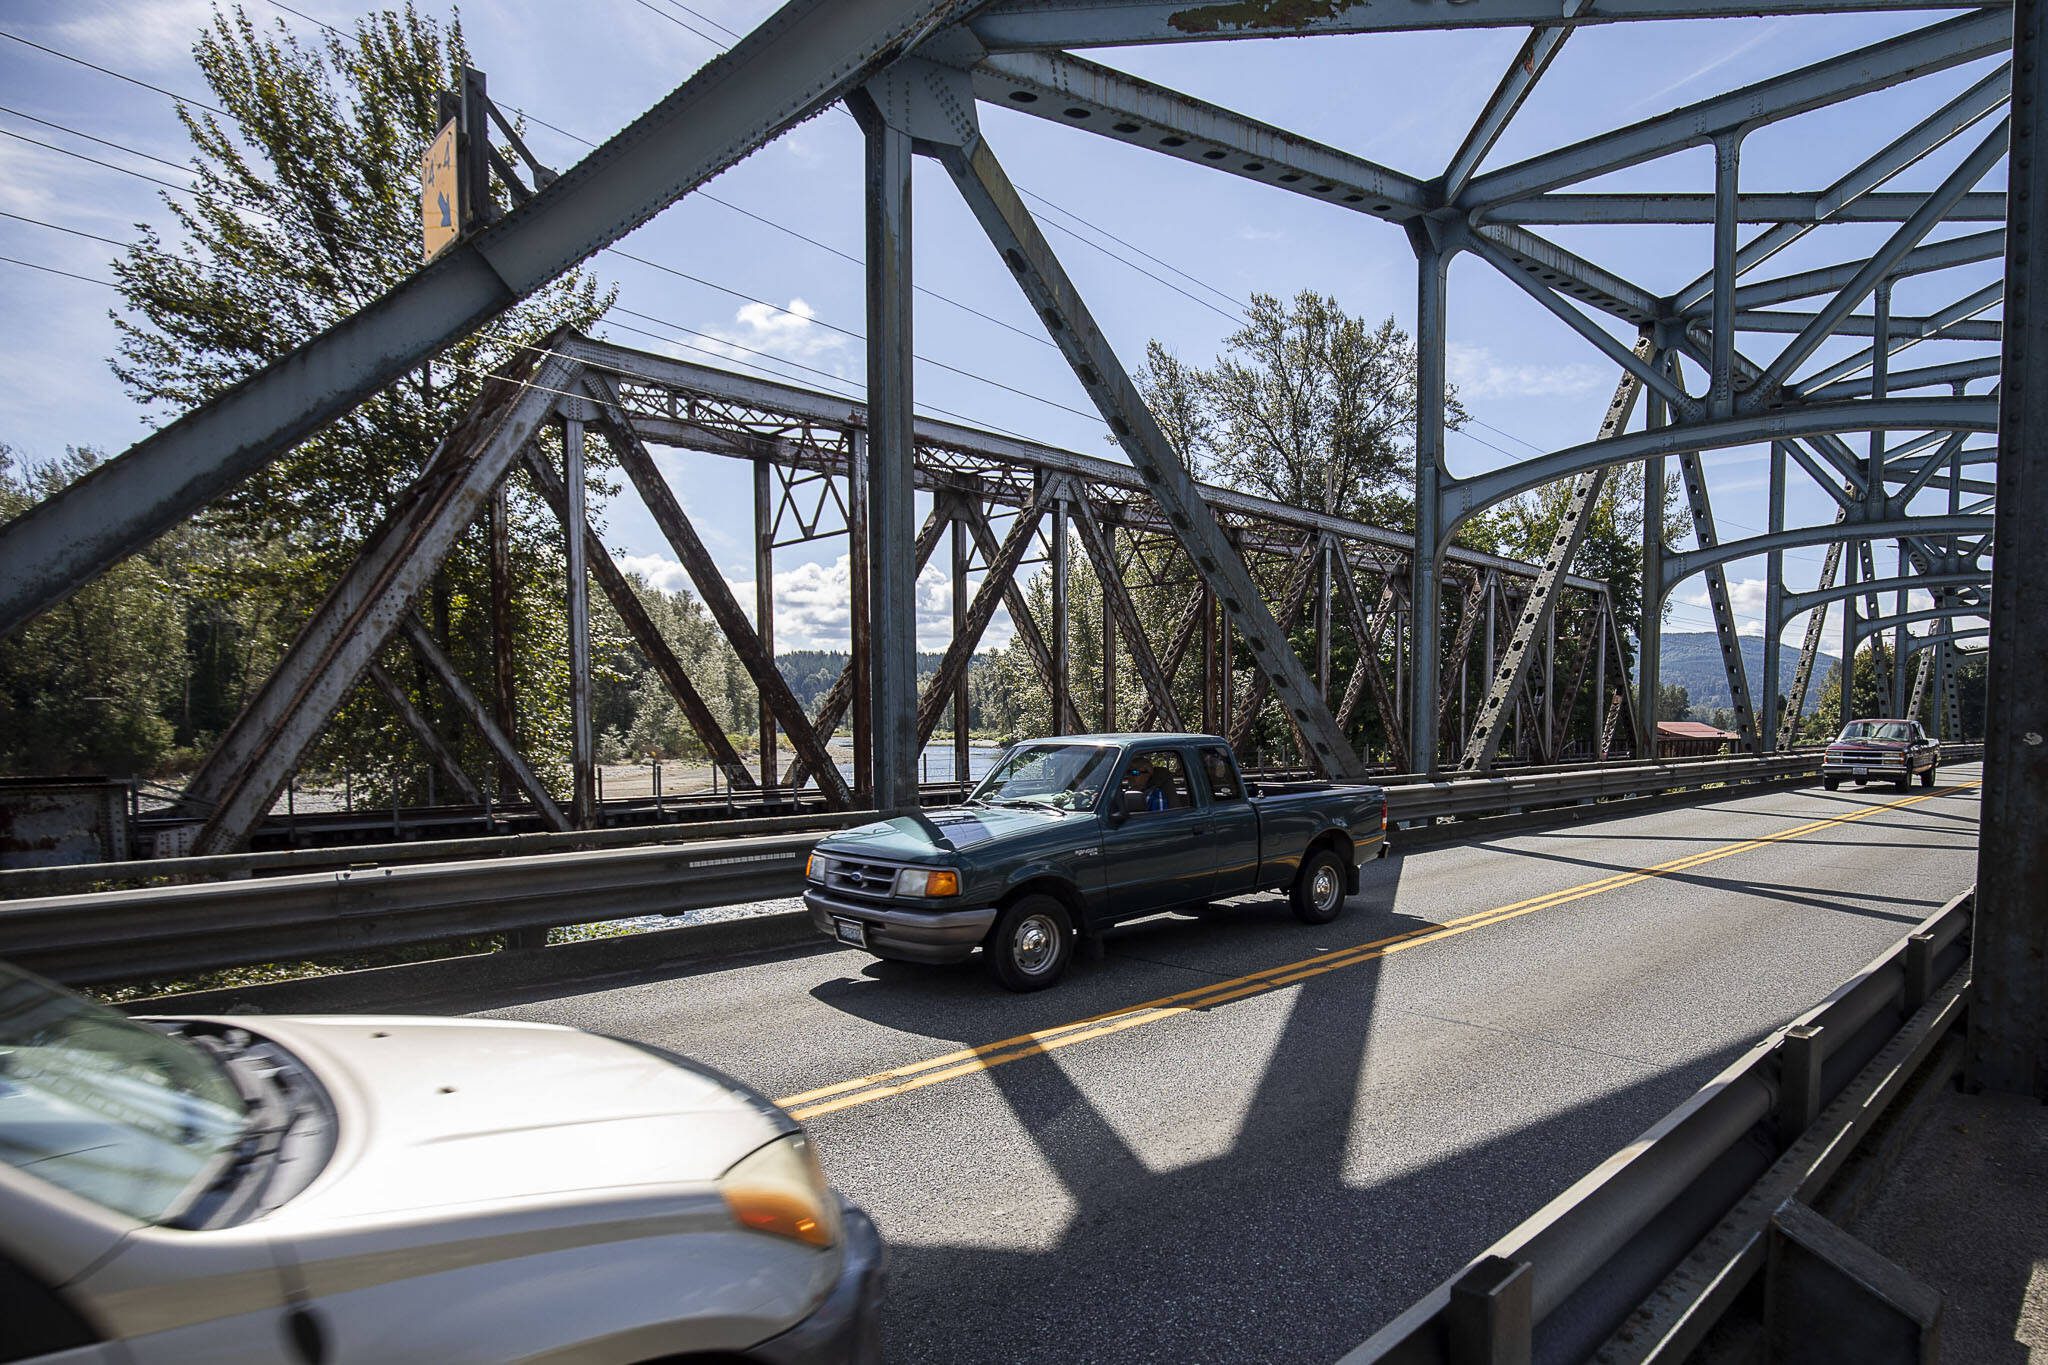 Cars drive near River Park in Sultan, Washington on Wednesday, Sept. 13, 2023. (Annie Barker / The Herald)